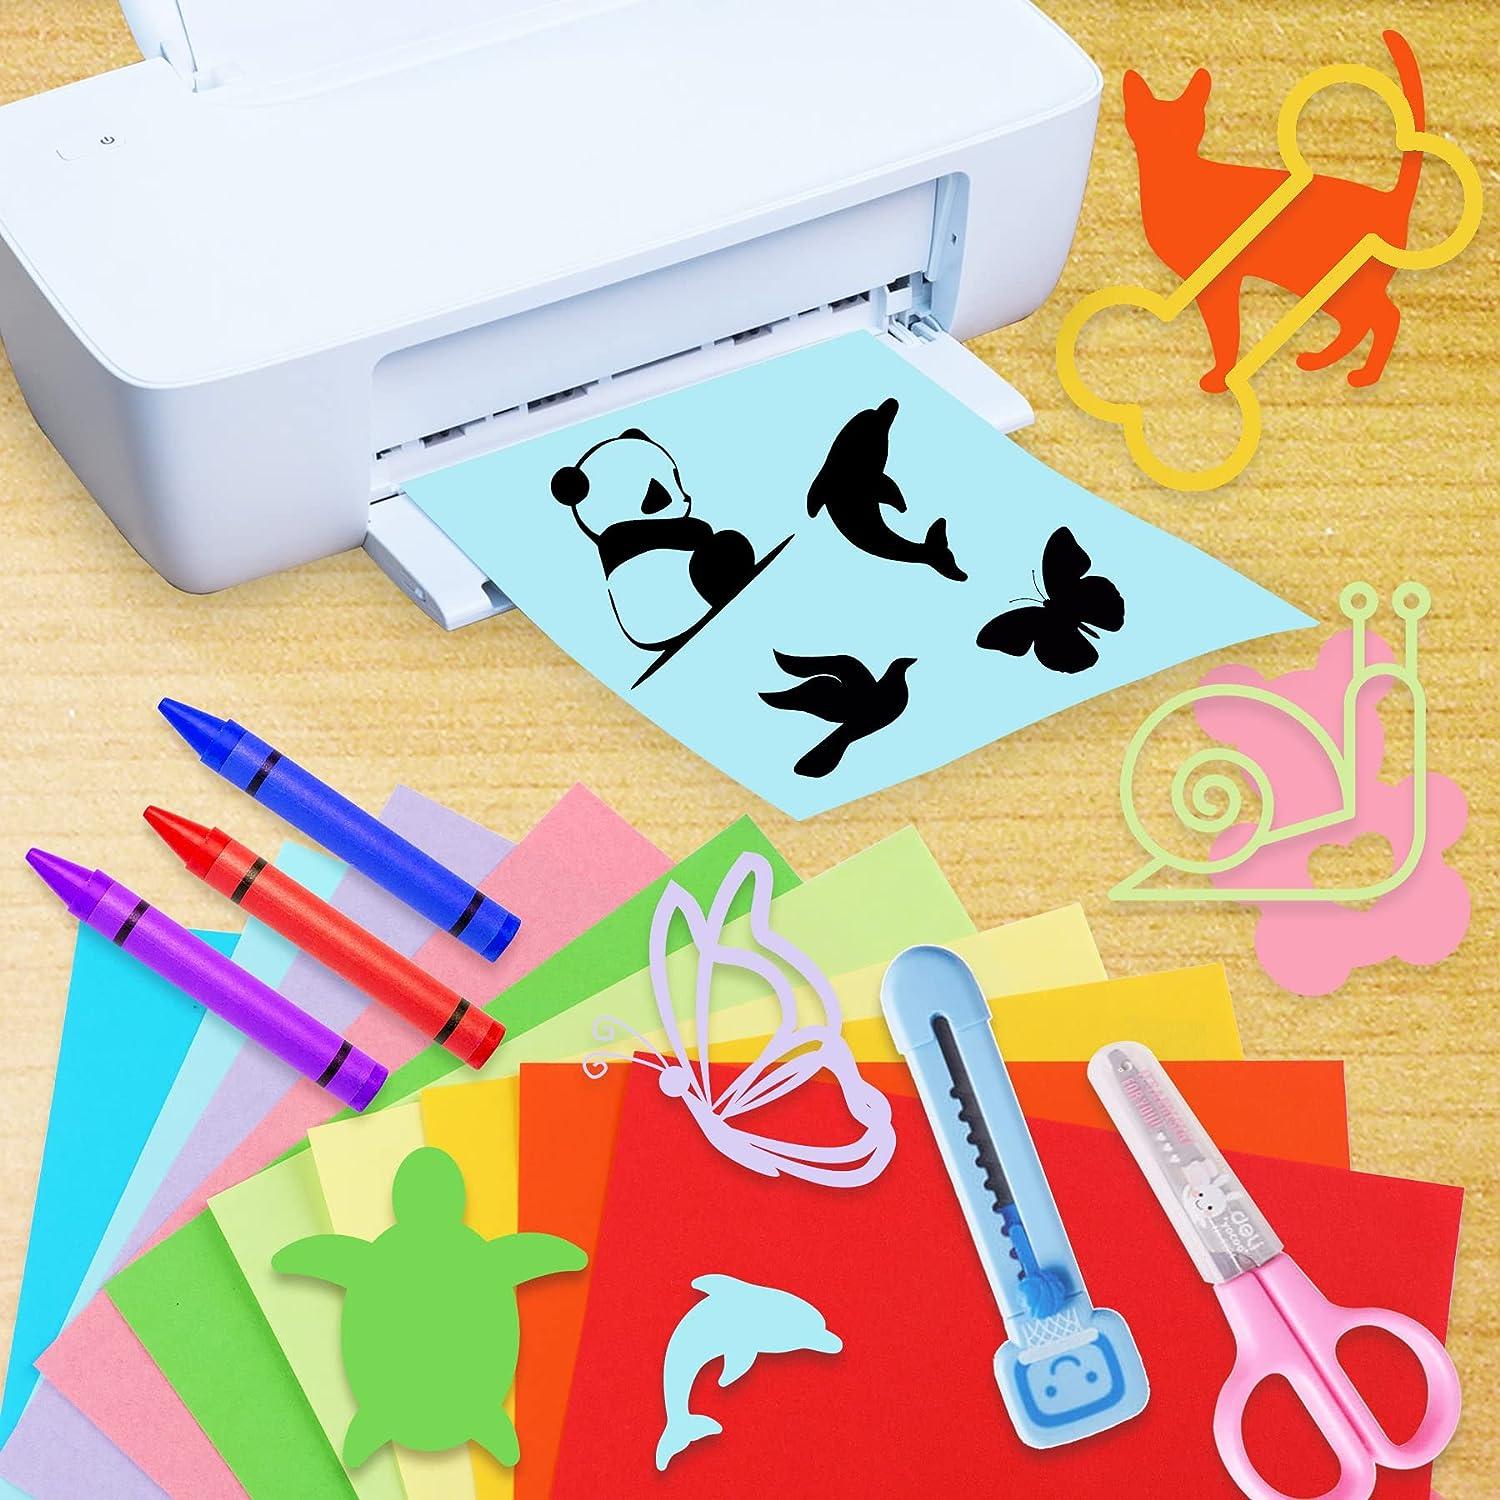 EXCEART 200 Sheets origami colored printer paper colorful paper scrapbook  kindergarten paper glow in the dark party supplies assorted colors paper